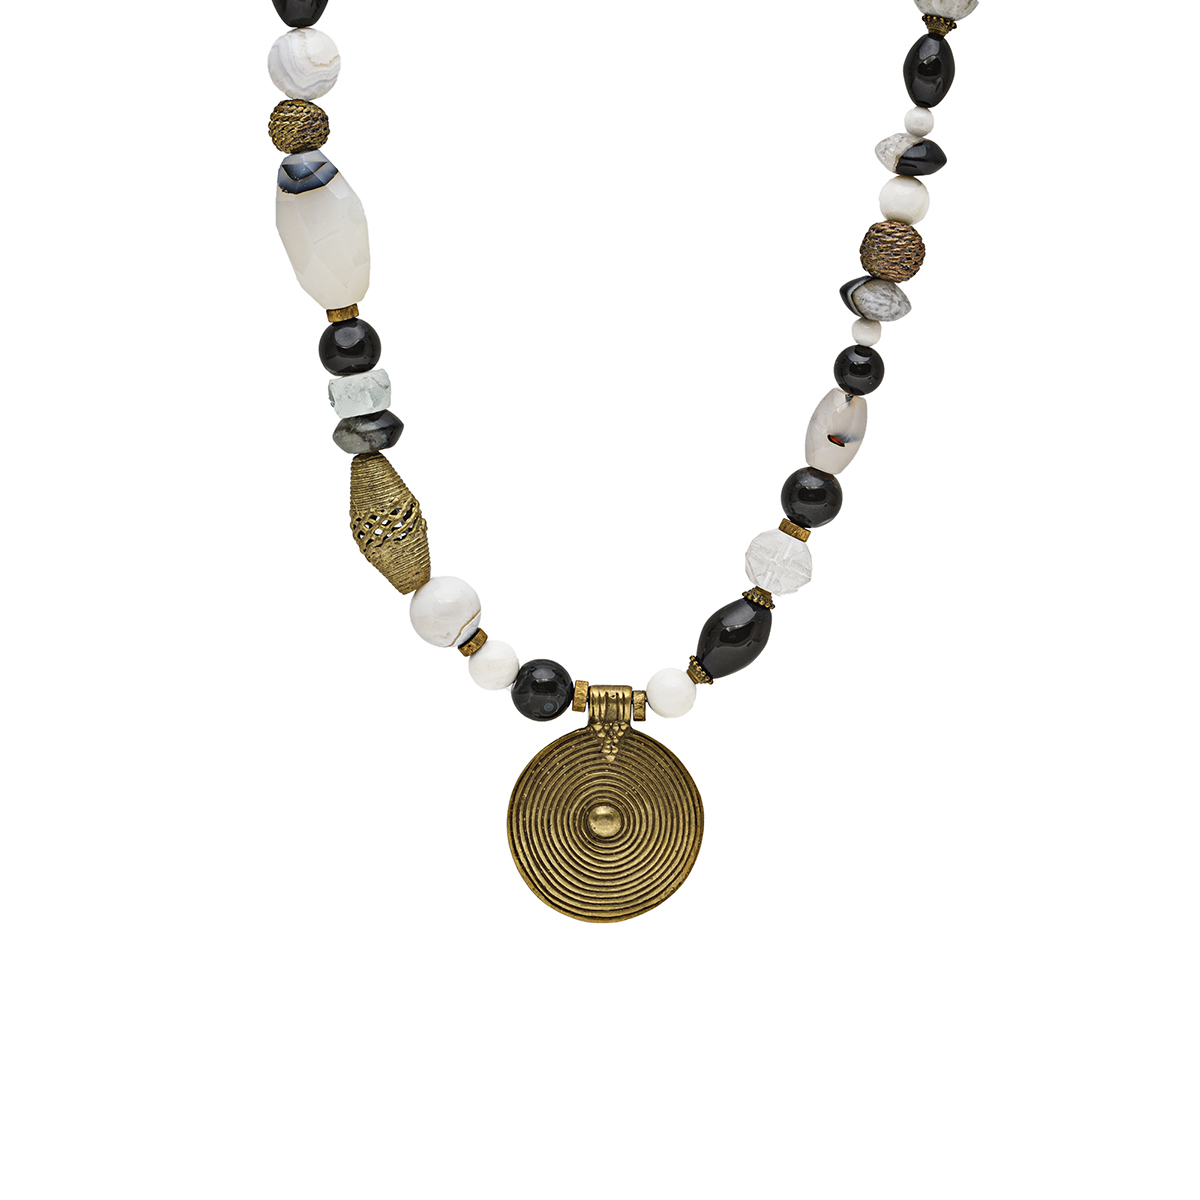 White and black agate necklace